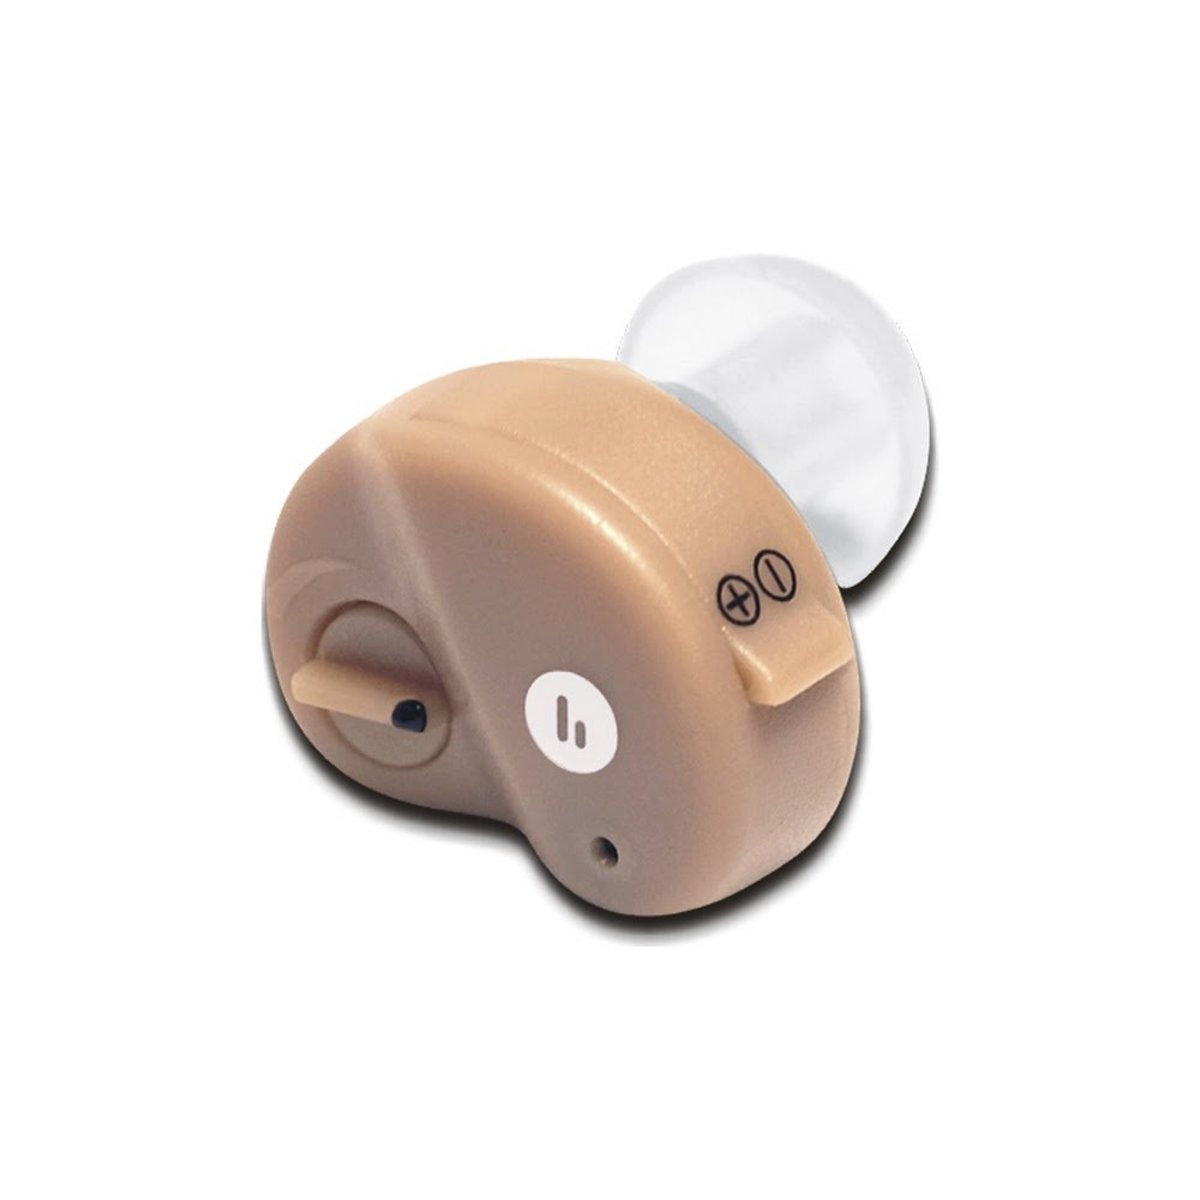 hopewell - HAP-80S (+110dB) over-the-ear hearing aid [Hong Kong licensed]